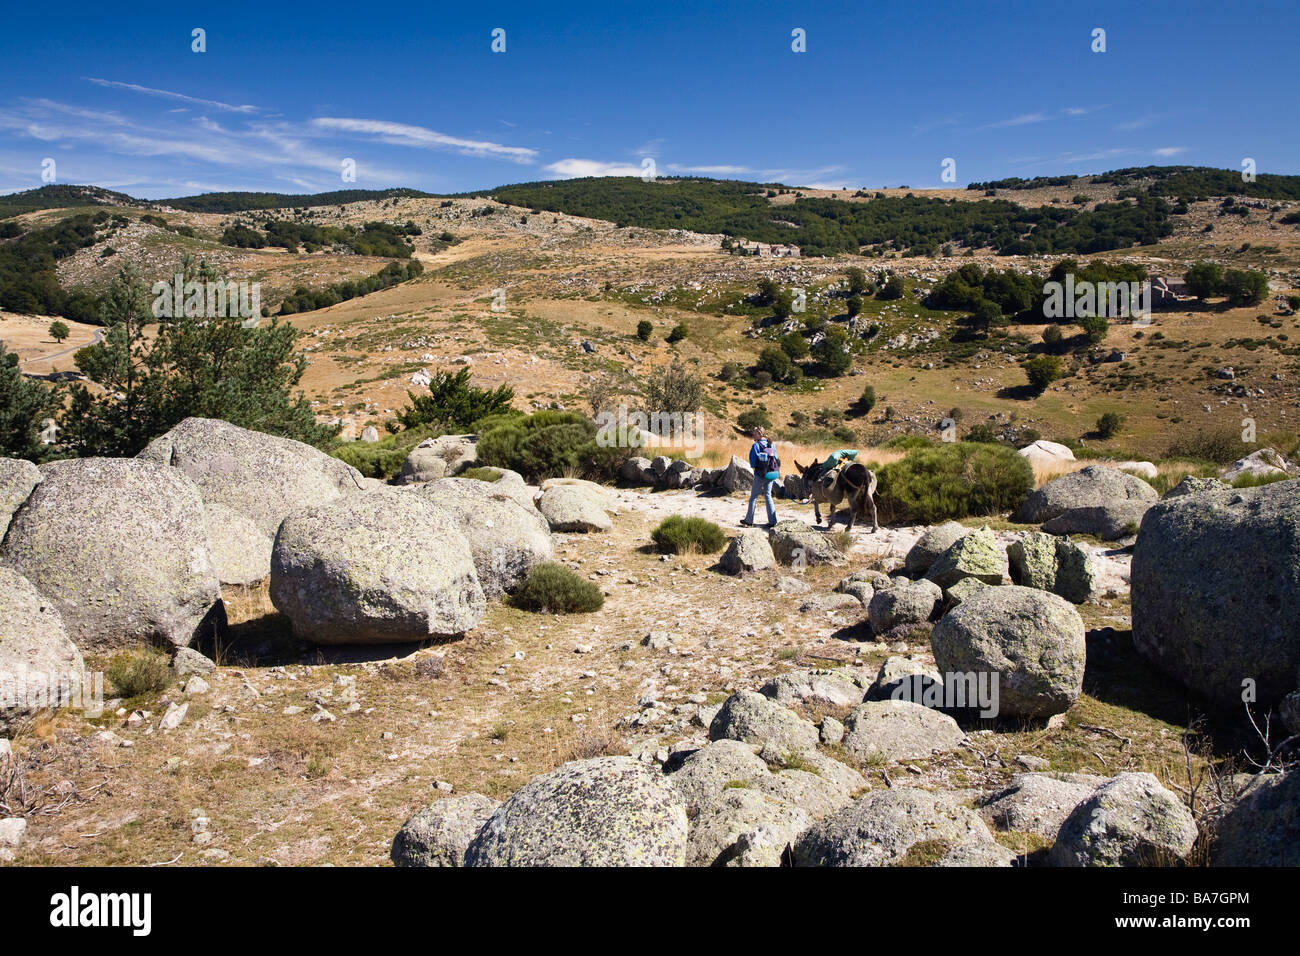 Woman on a hiking tour, Hiking trip with a donkey in the Cevennes mountains, Cevennen, France Stock Photo